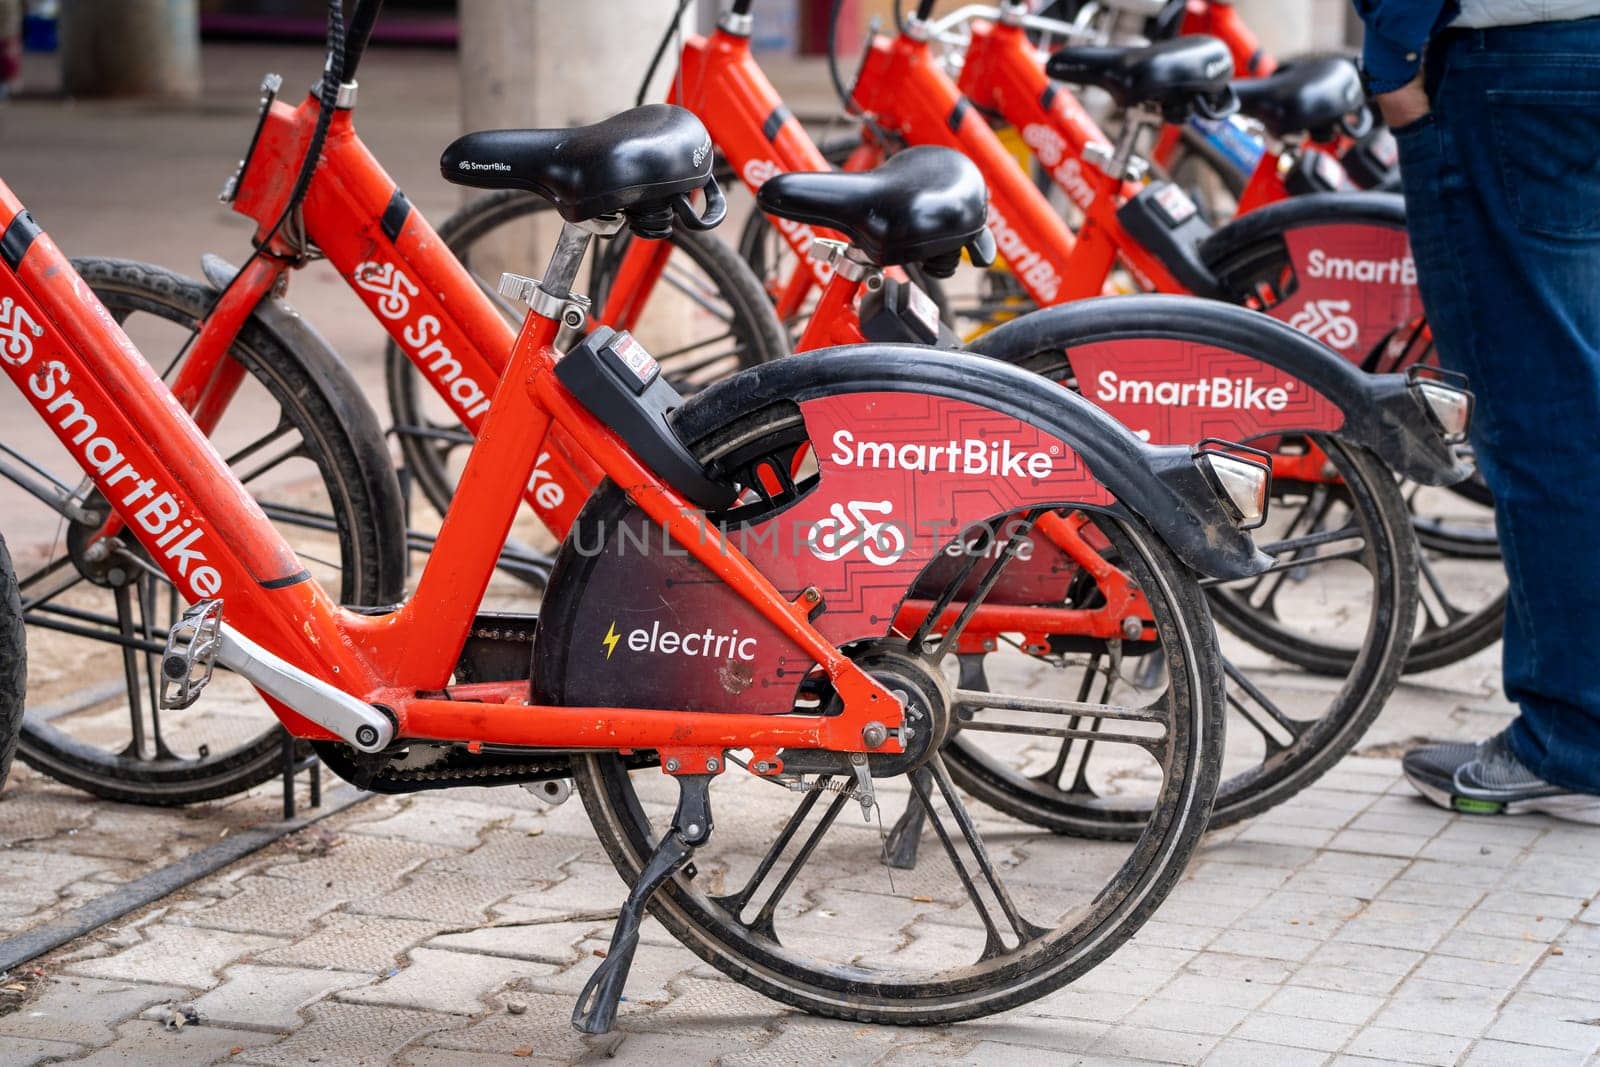 cycle stand with red colored smart bikes standing for rent showing this internet mobility startup providing eco friendly cycles for hire by Shalinimathur